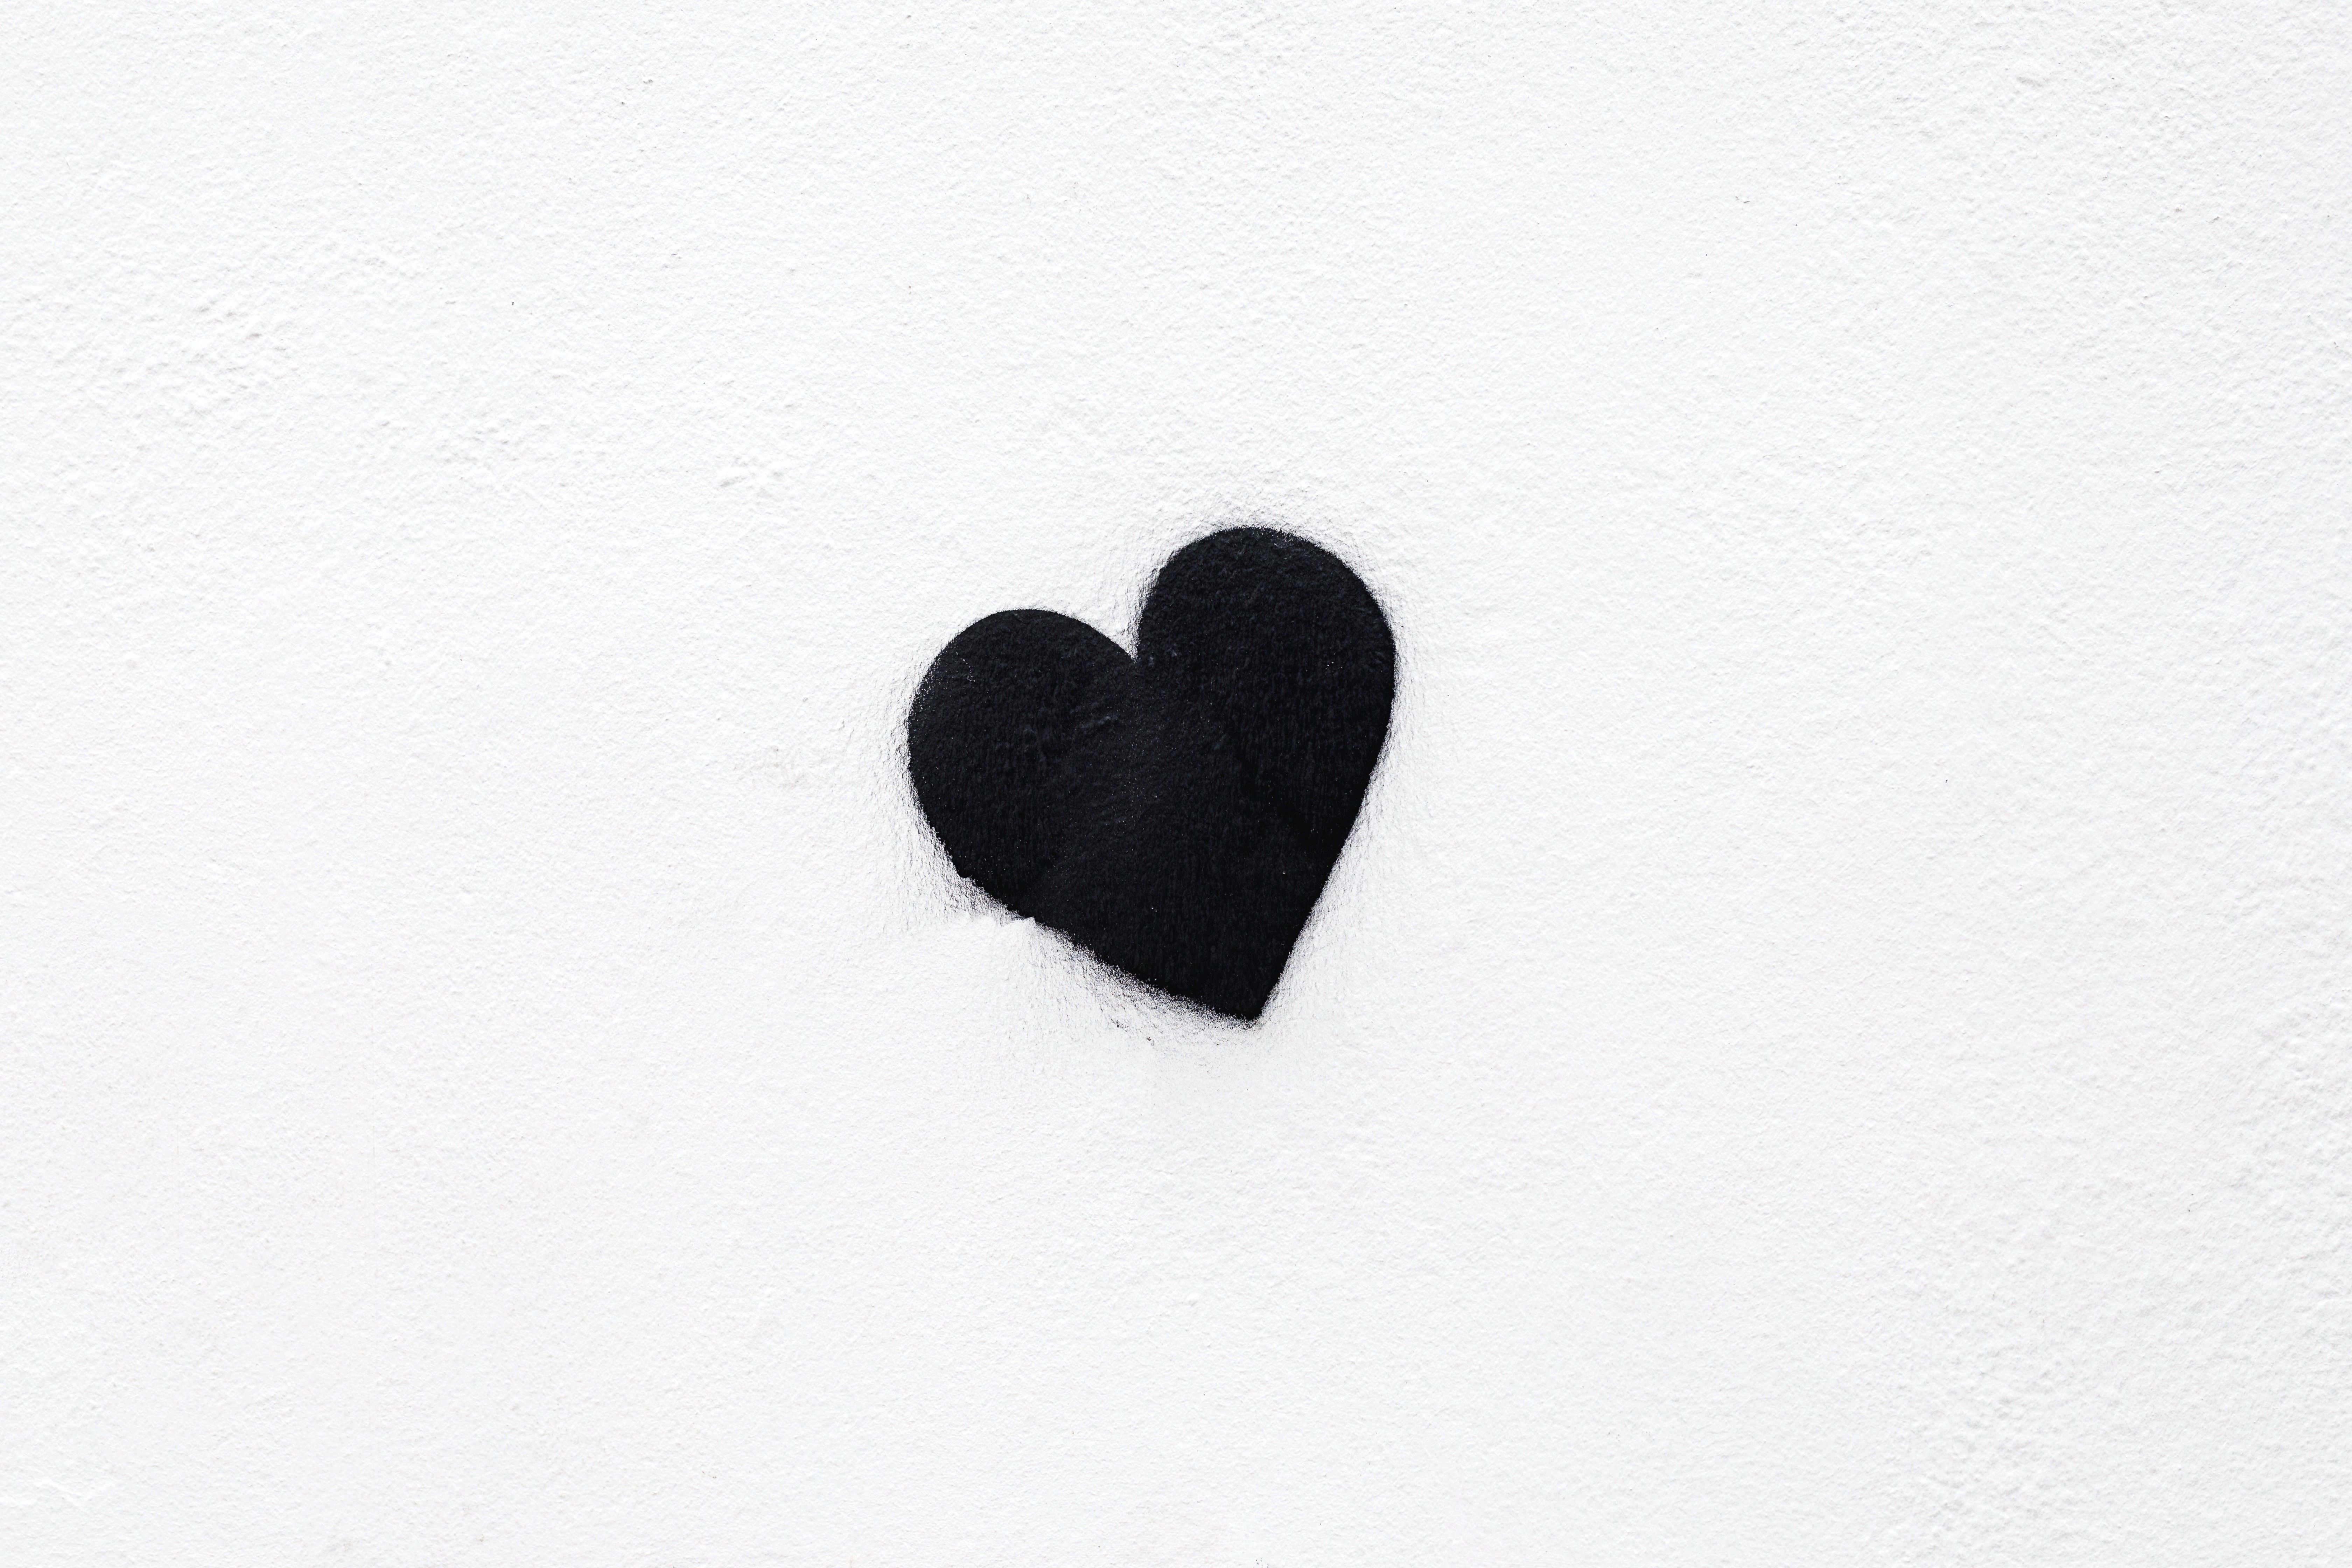 A black heart is drawn on the wall - Heart, black heart